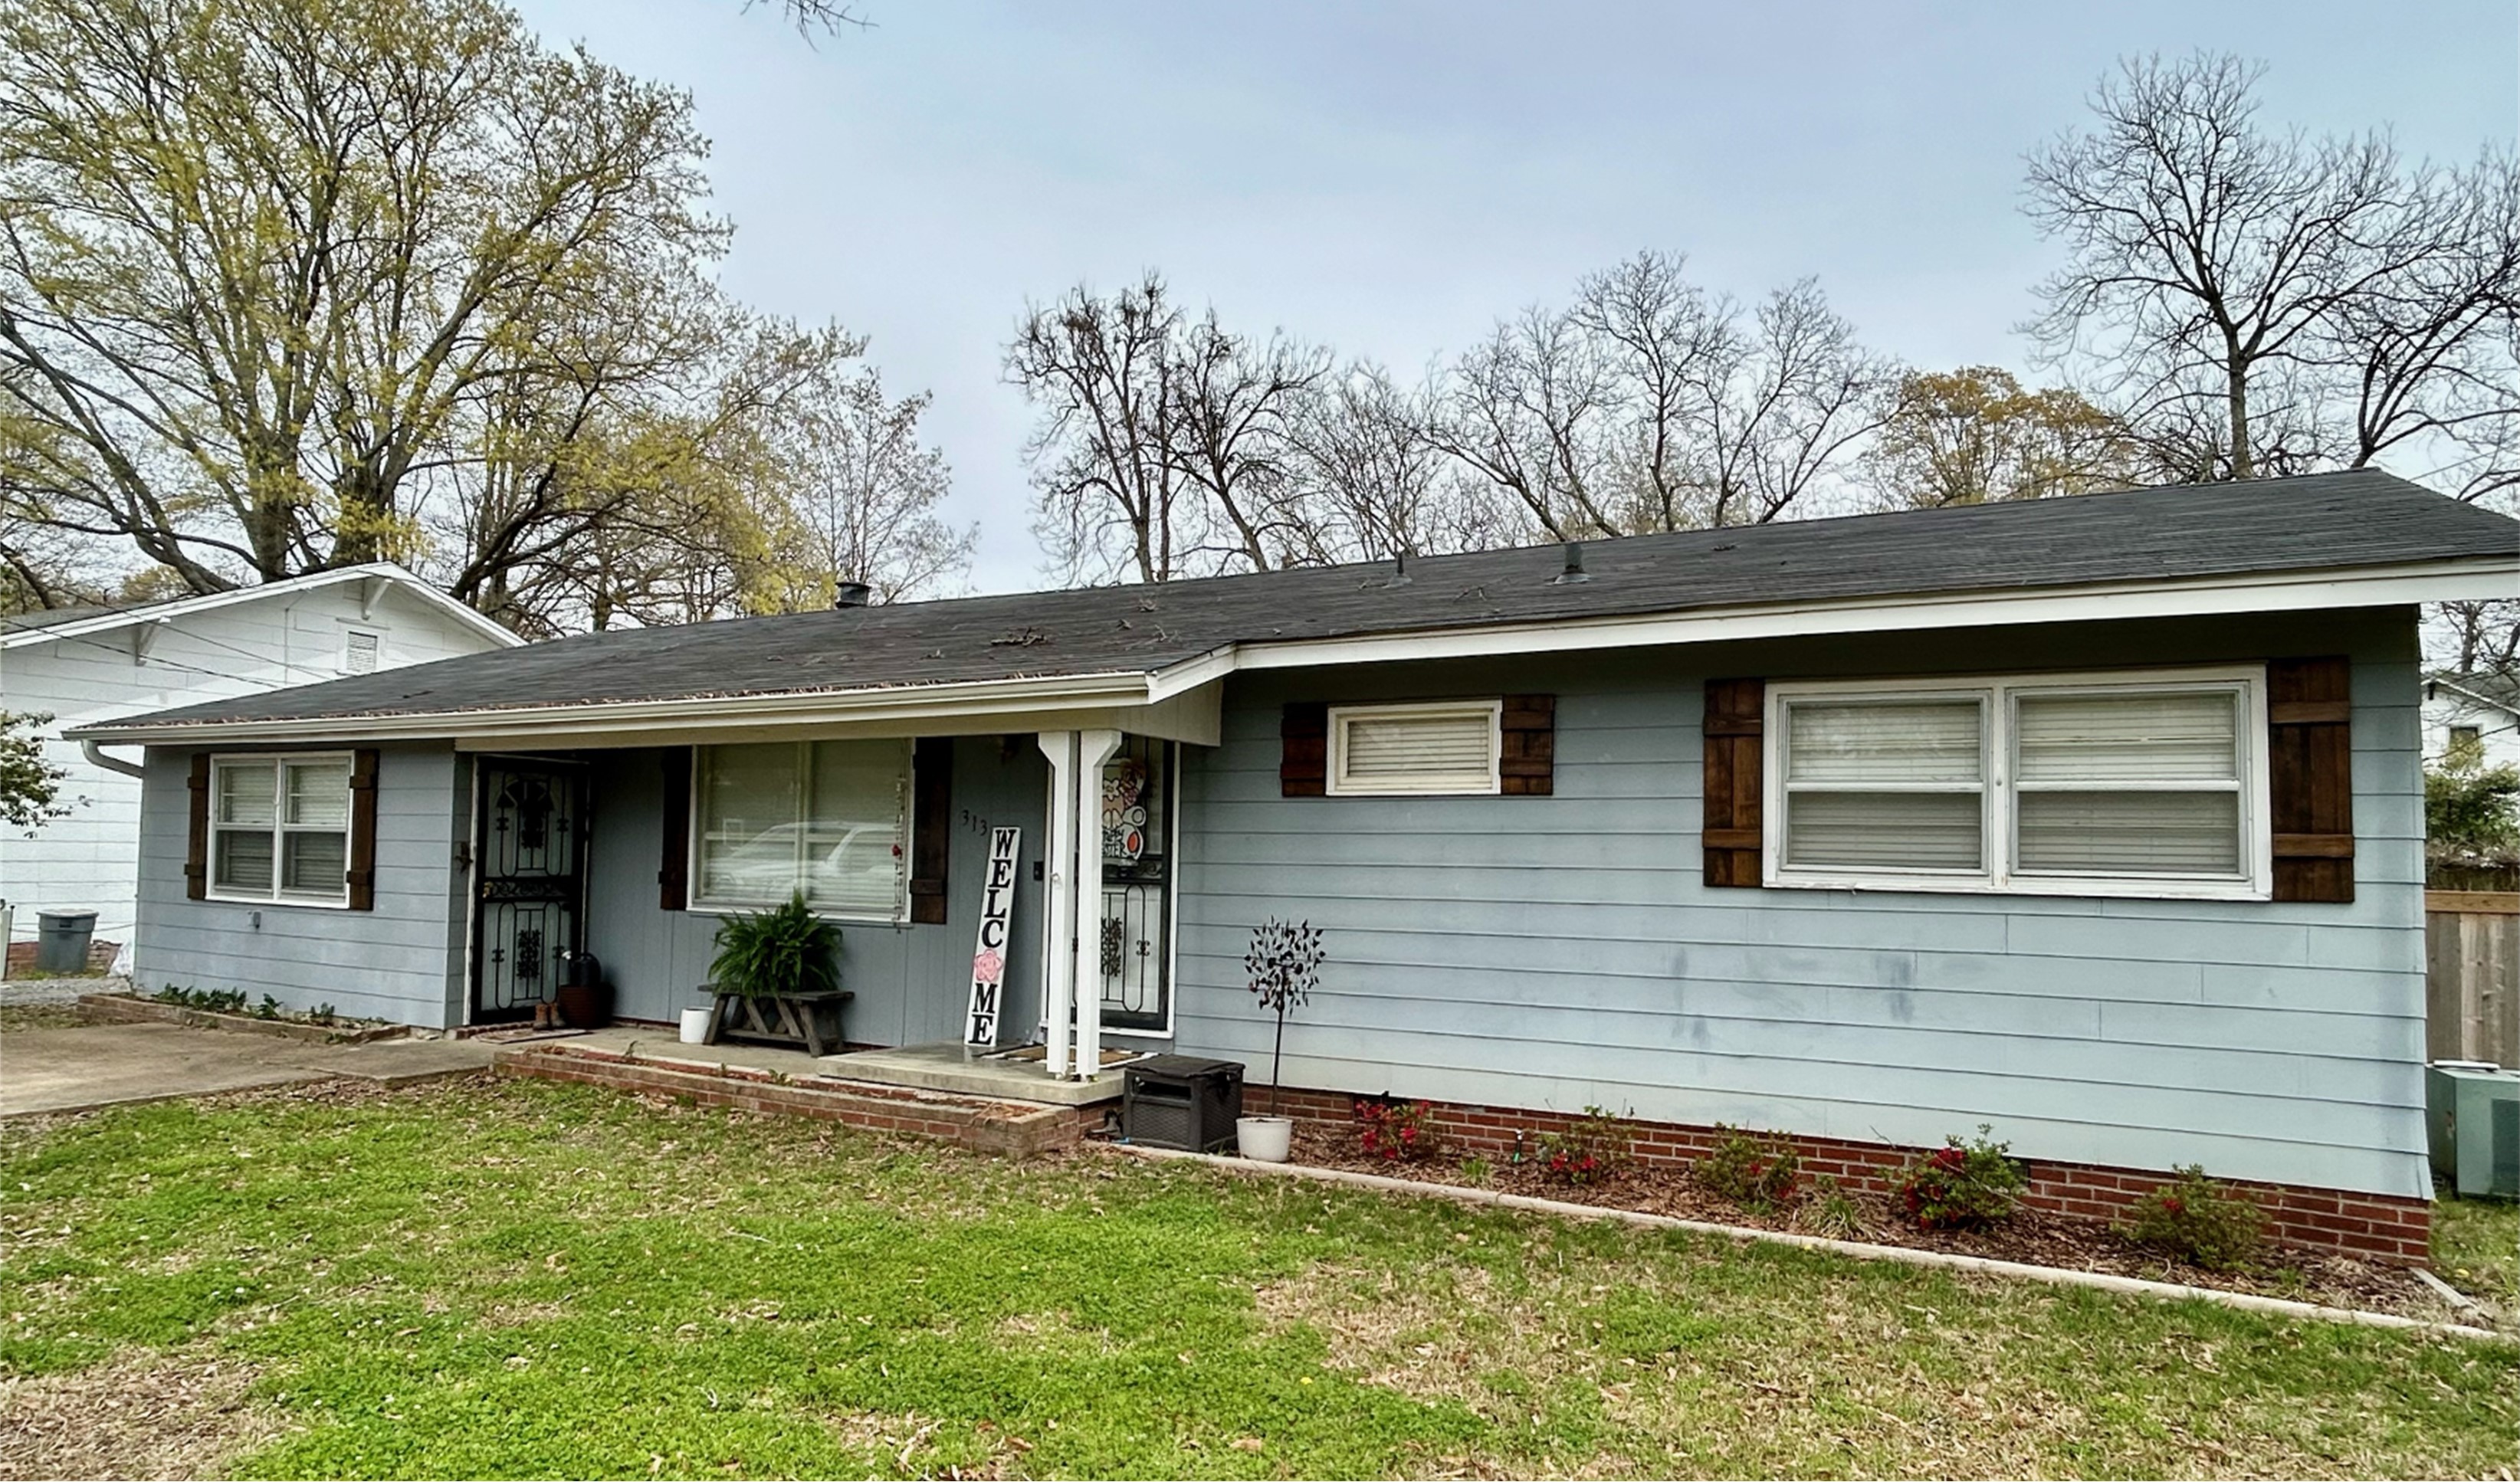 Home in Bolivar County at 313 South Victoria Avenue in Cleveland, MS